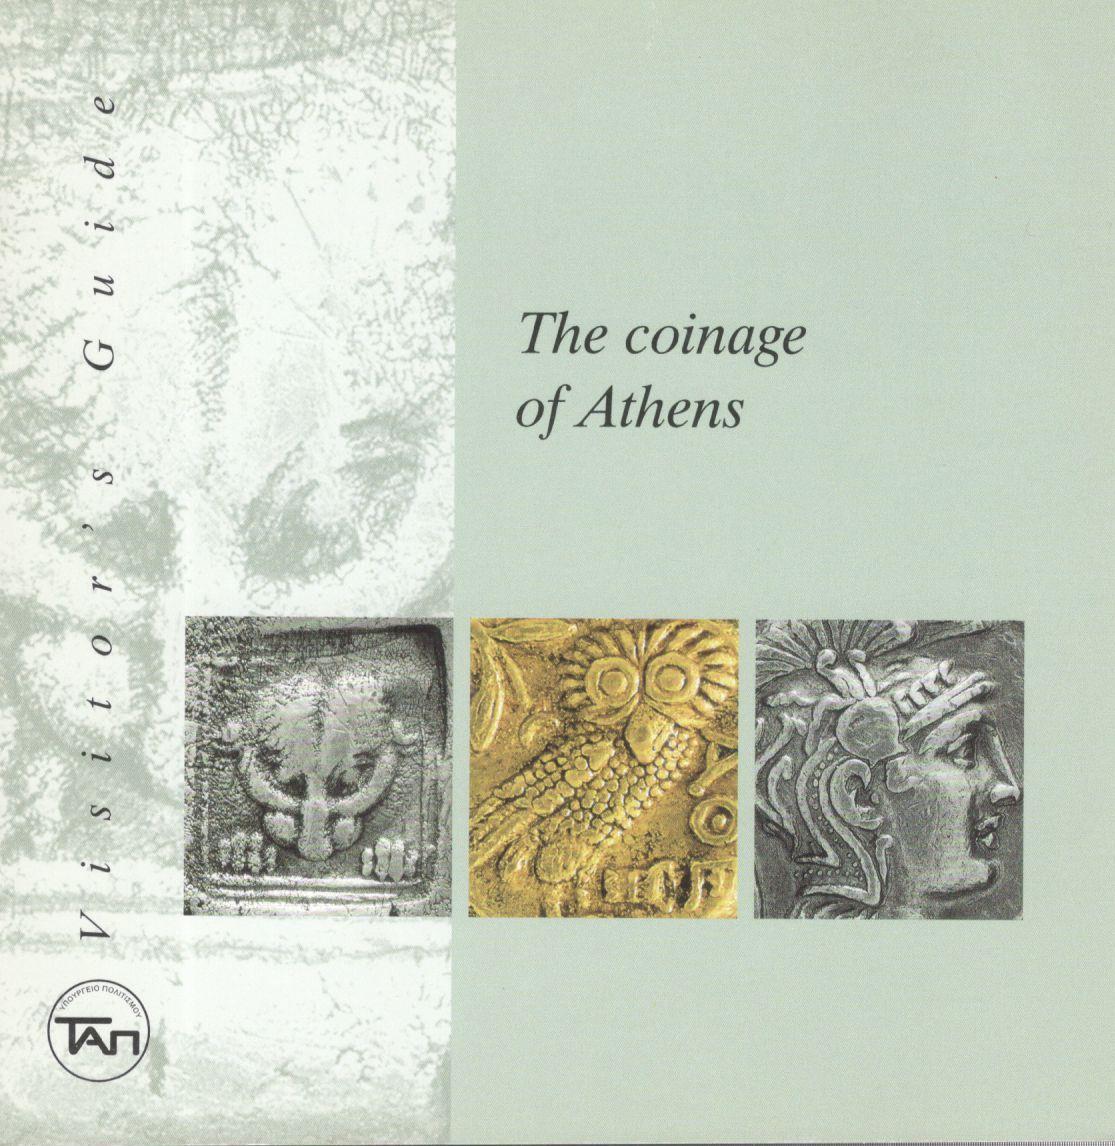 THE COINAGE OF ATHENS